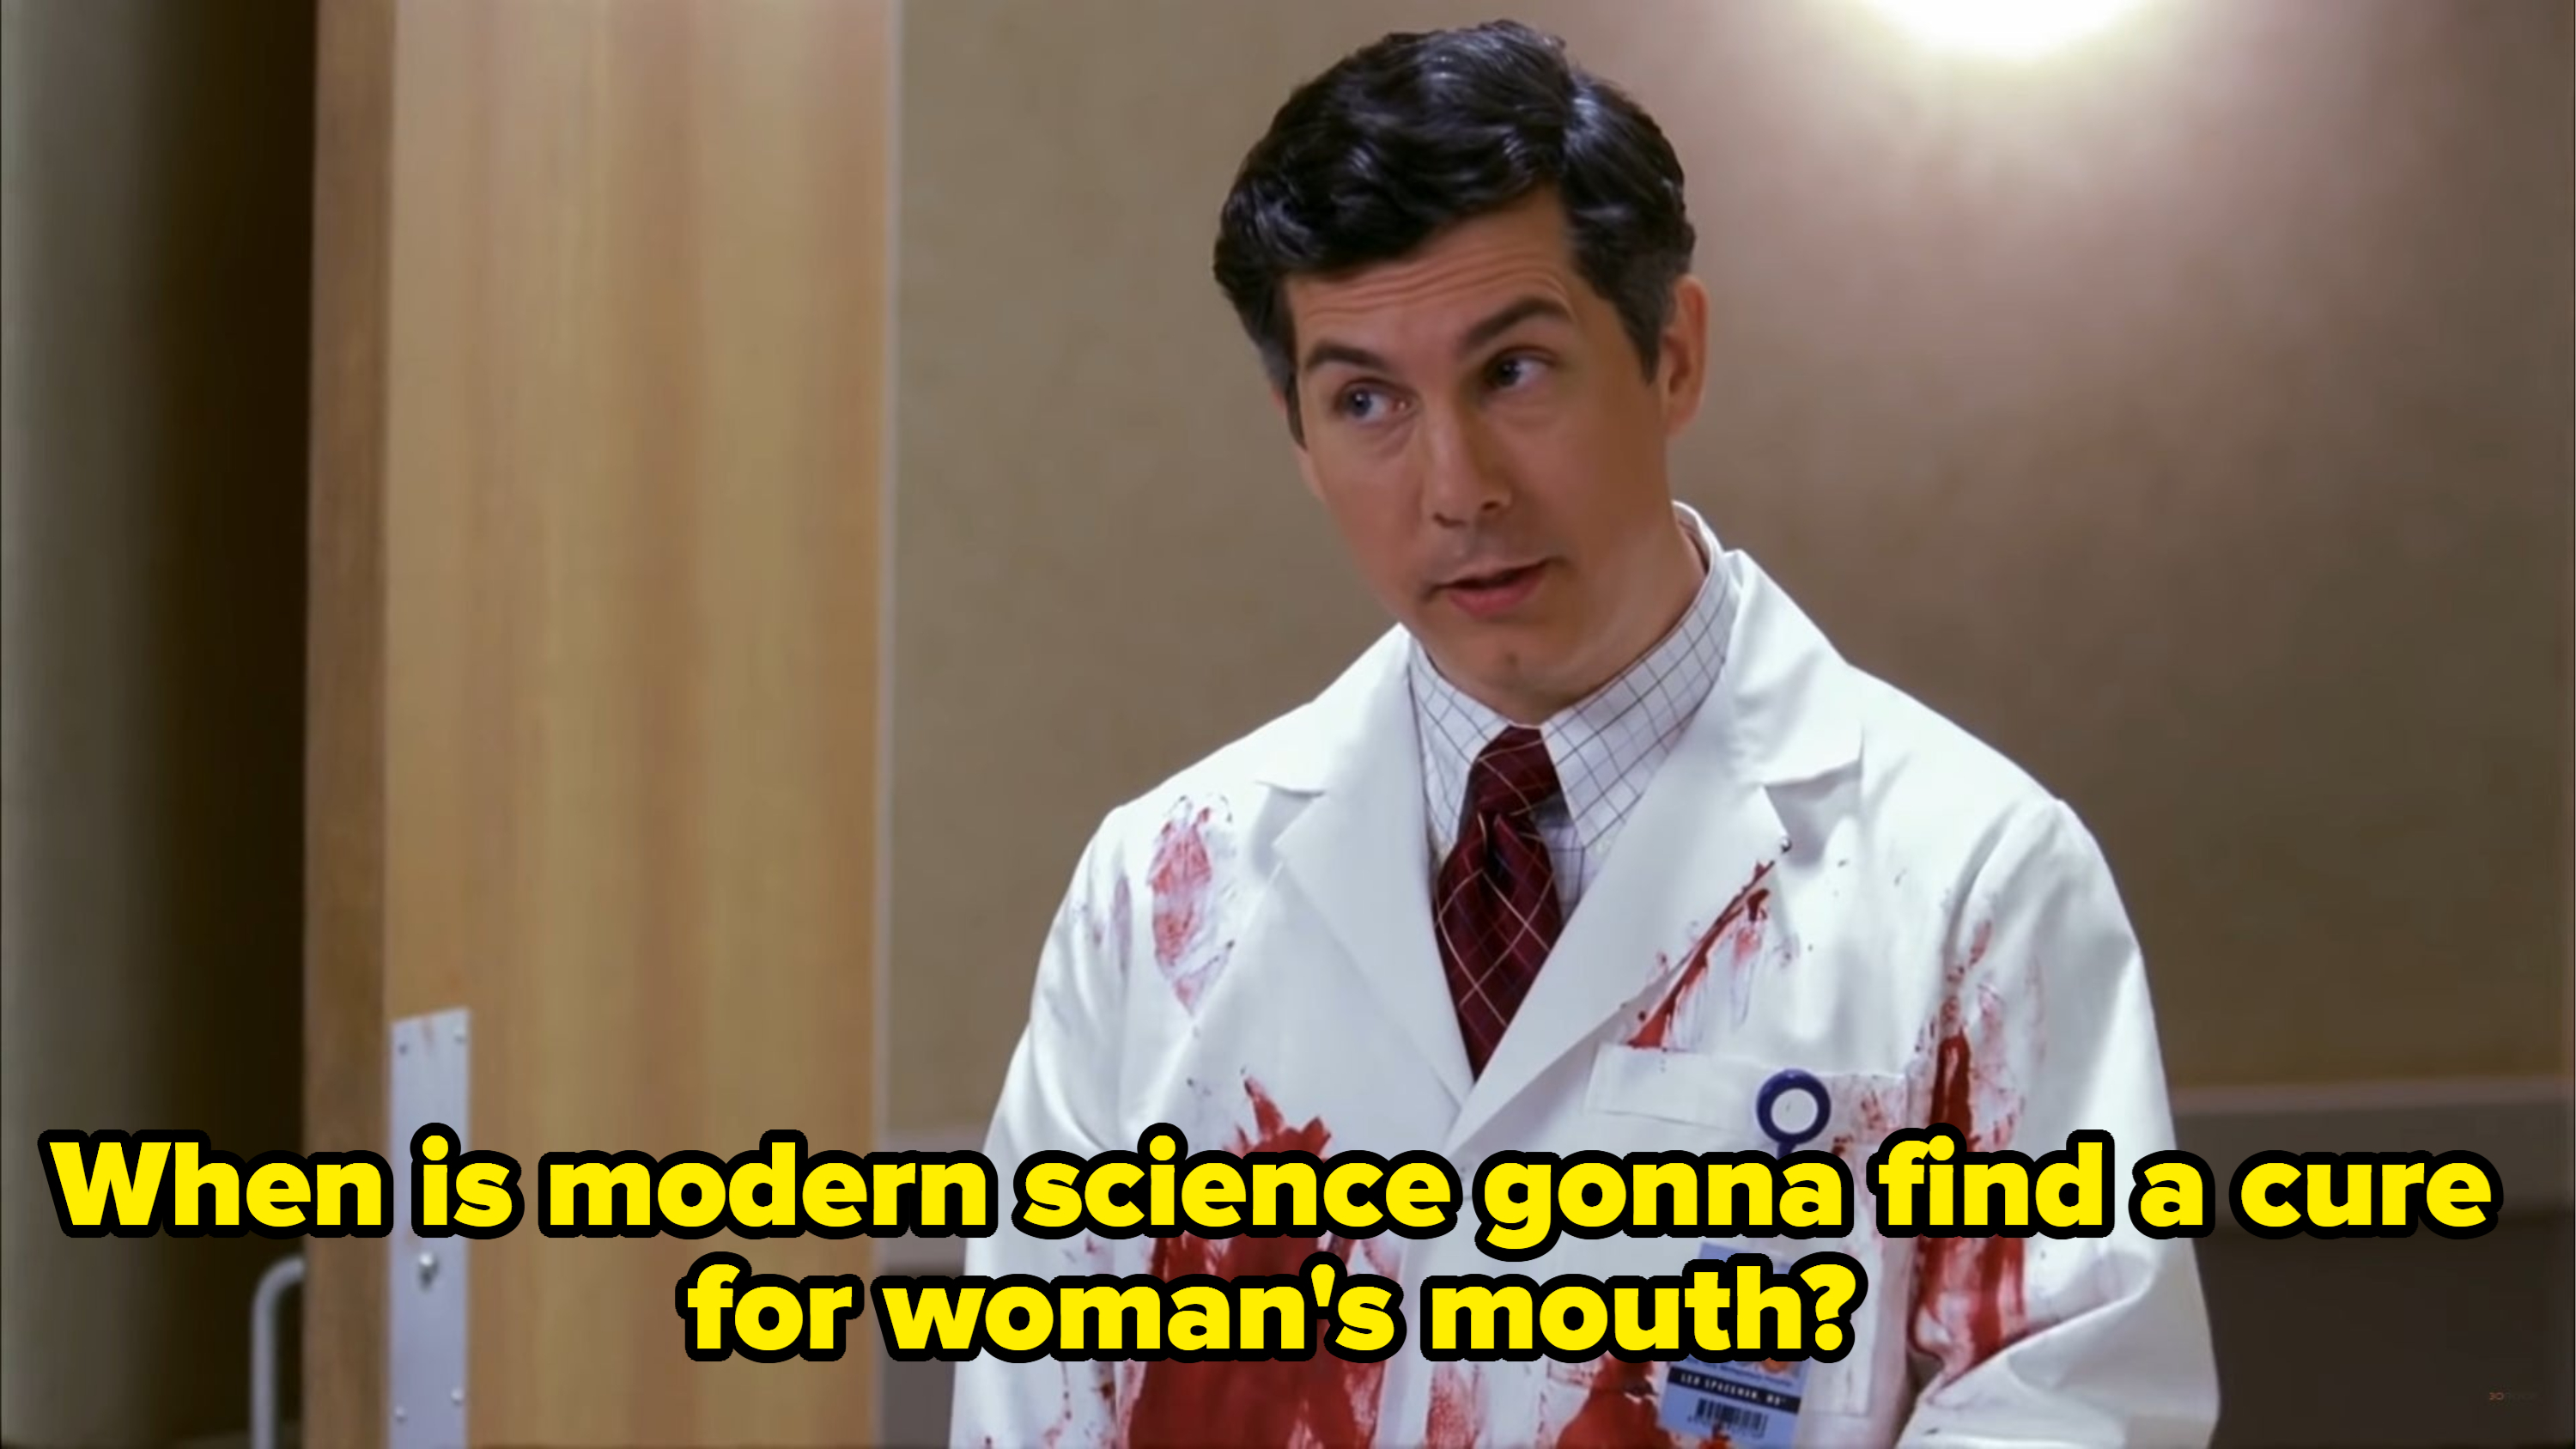 Chris Parnell dressed as a doctor